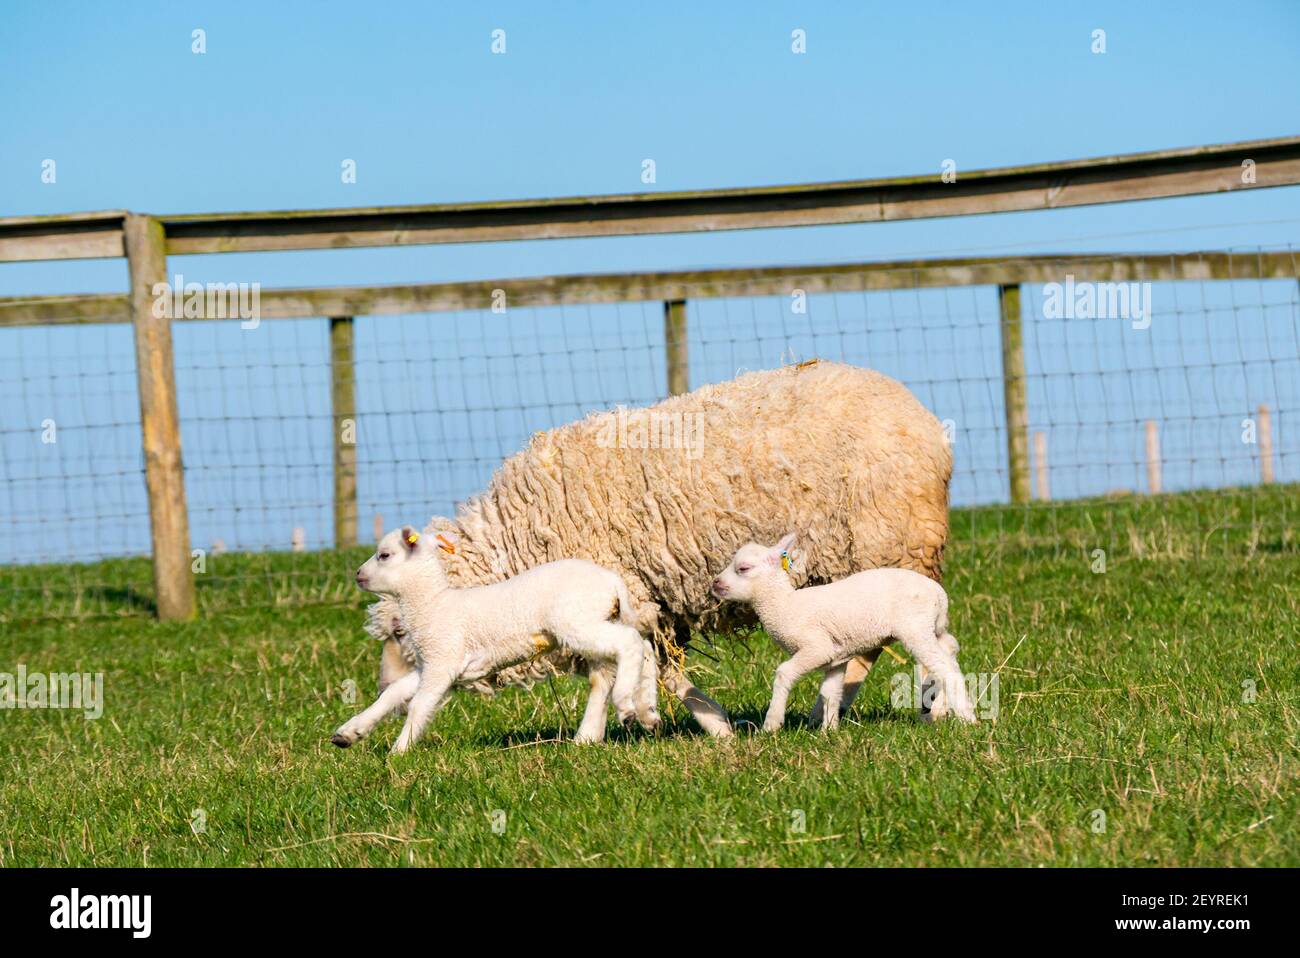 East Lothian, Scotland, United Kingdom, 6th March 2021. UK Weather: Spring lambs in sunshine. Shetland sheep twin lambs are let out into a pen in a field for the first time after being born in a barn several weeks ago. An orange ear tag for a female lamb and a blue ear tag for a male lamb. Twin white lambs run across the field with the mother ewe Stock Photo